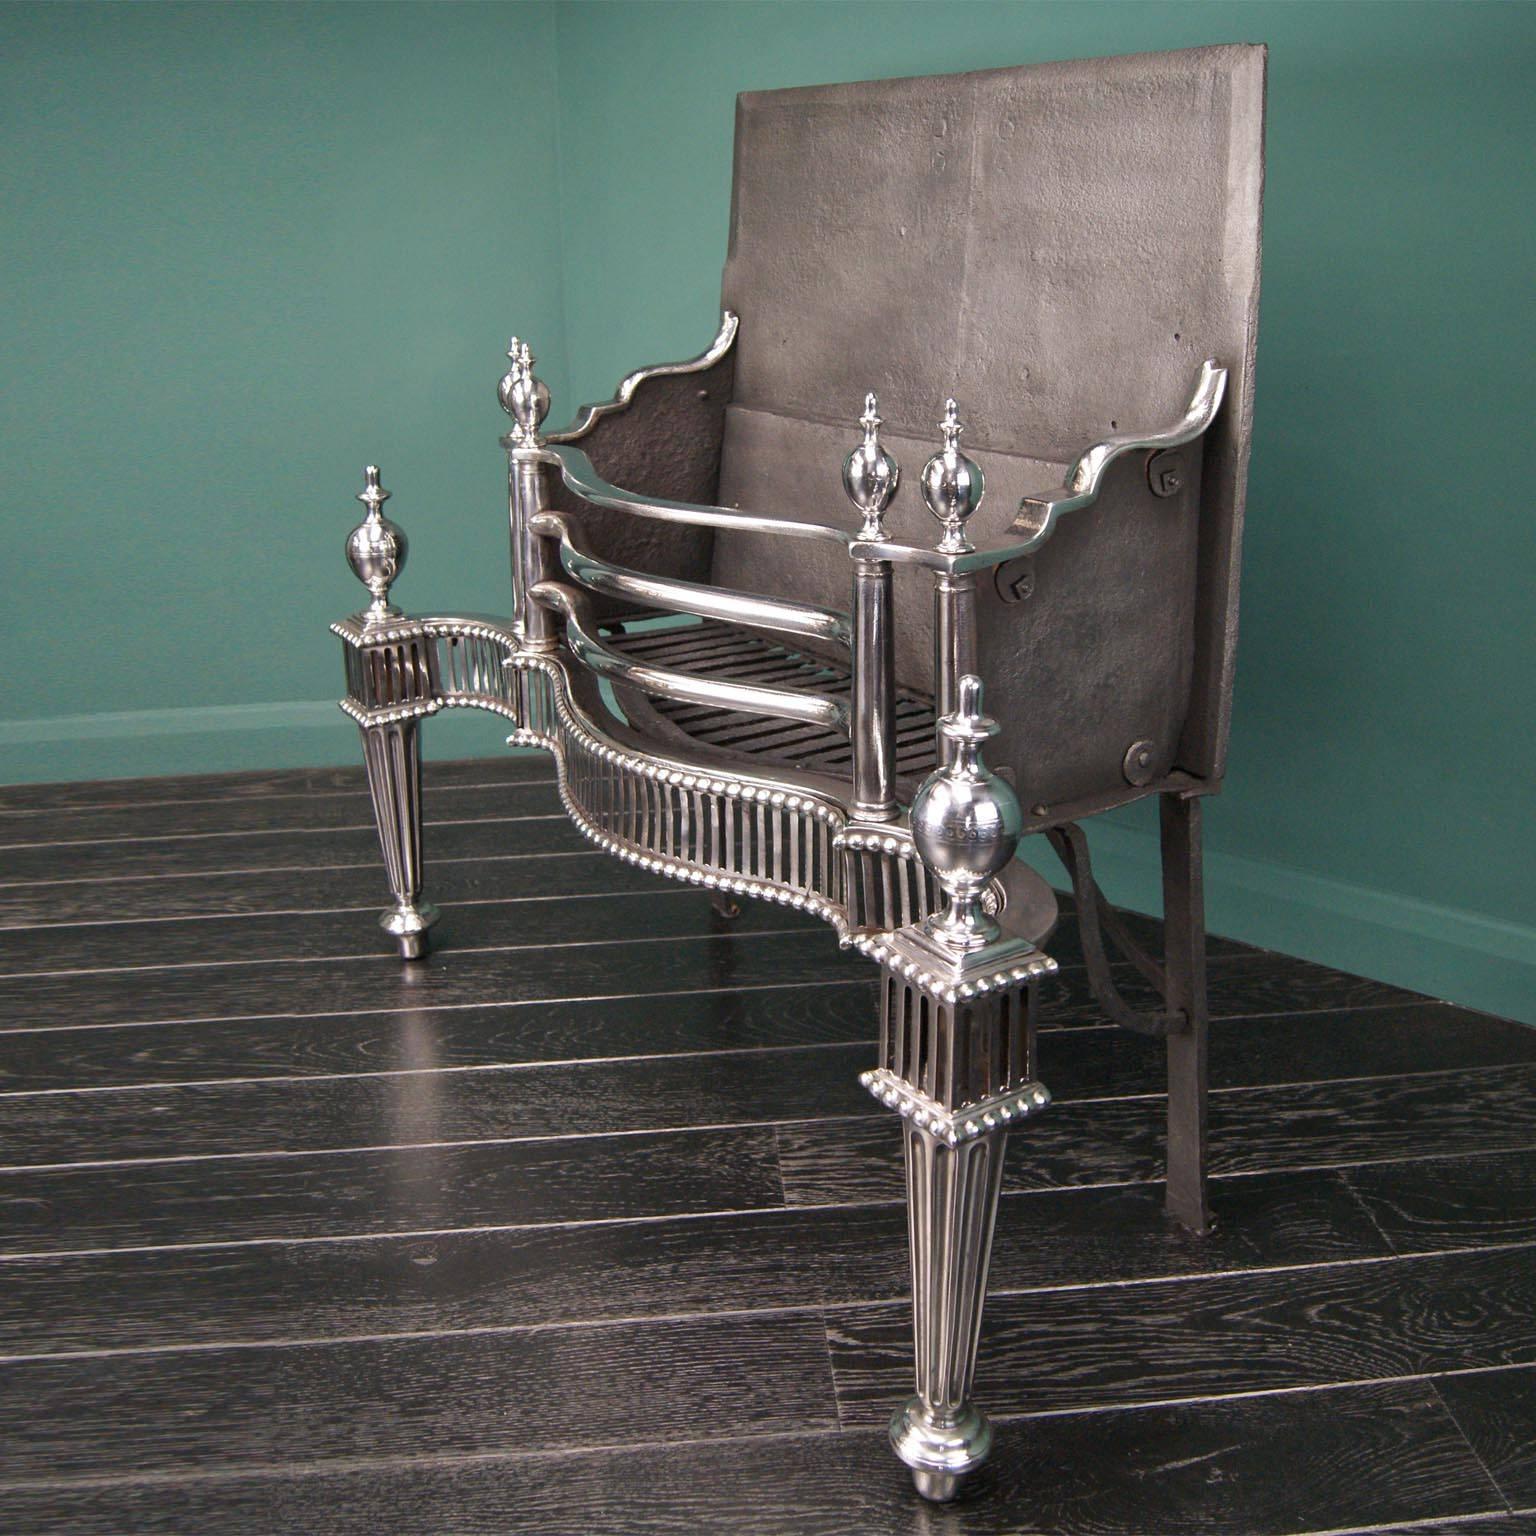 A magnificent English 18th century polished wrought iron dog grate. The serpentine basket front is flanked by double columns under bulbous vase finials. The fluted fret with beaded moulding is set between tapered column legs with fluted fillets.